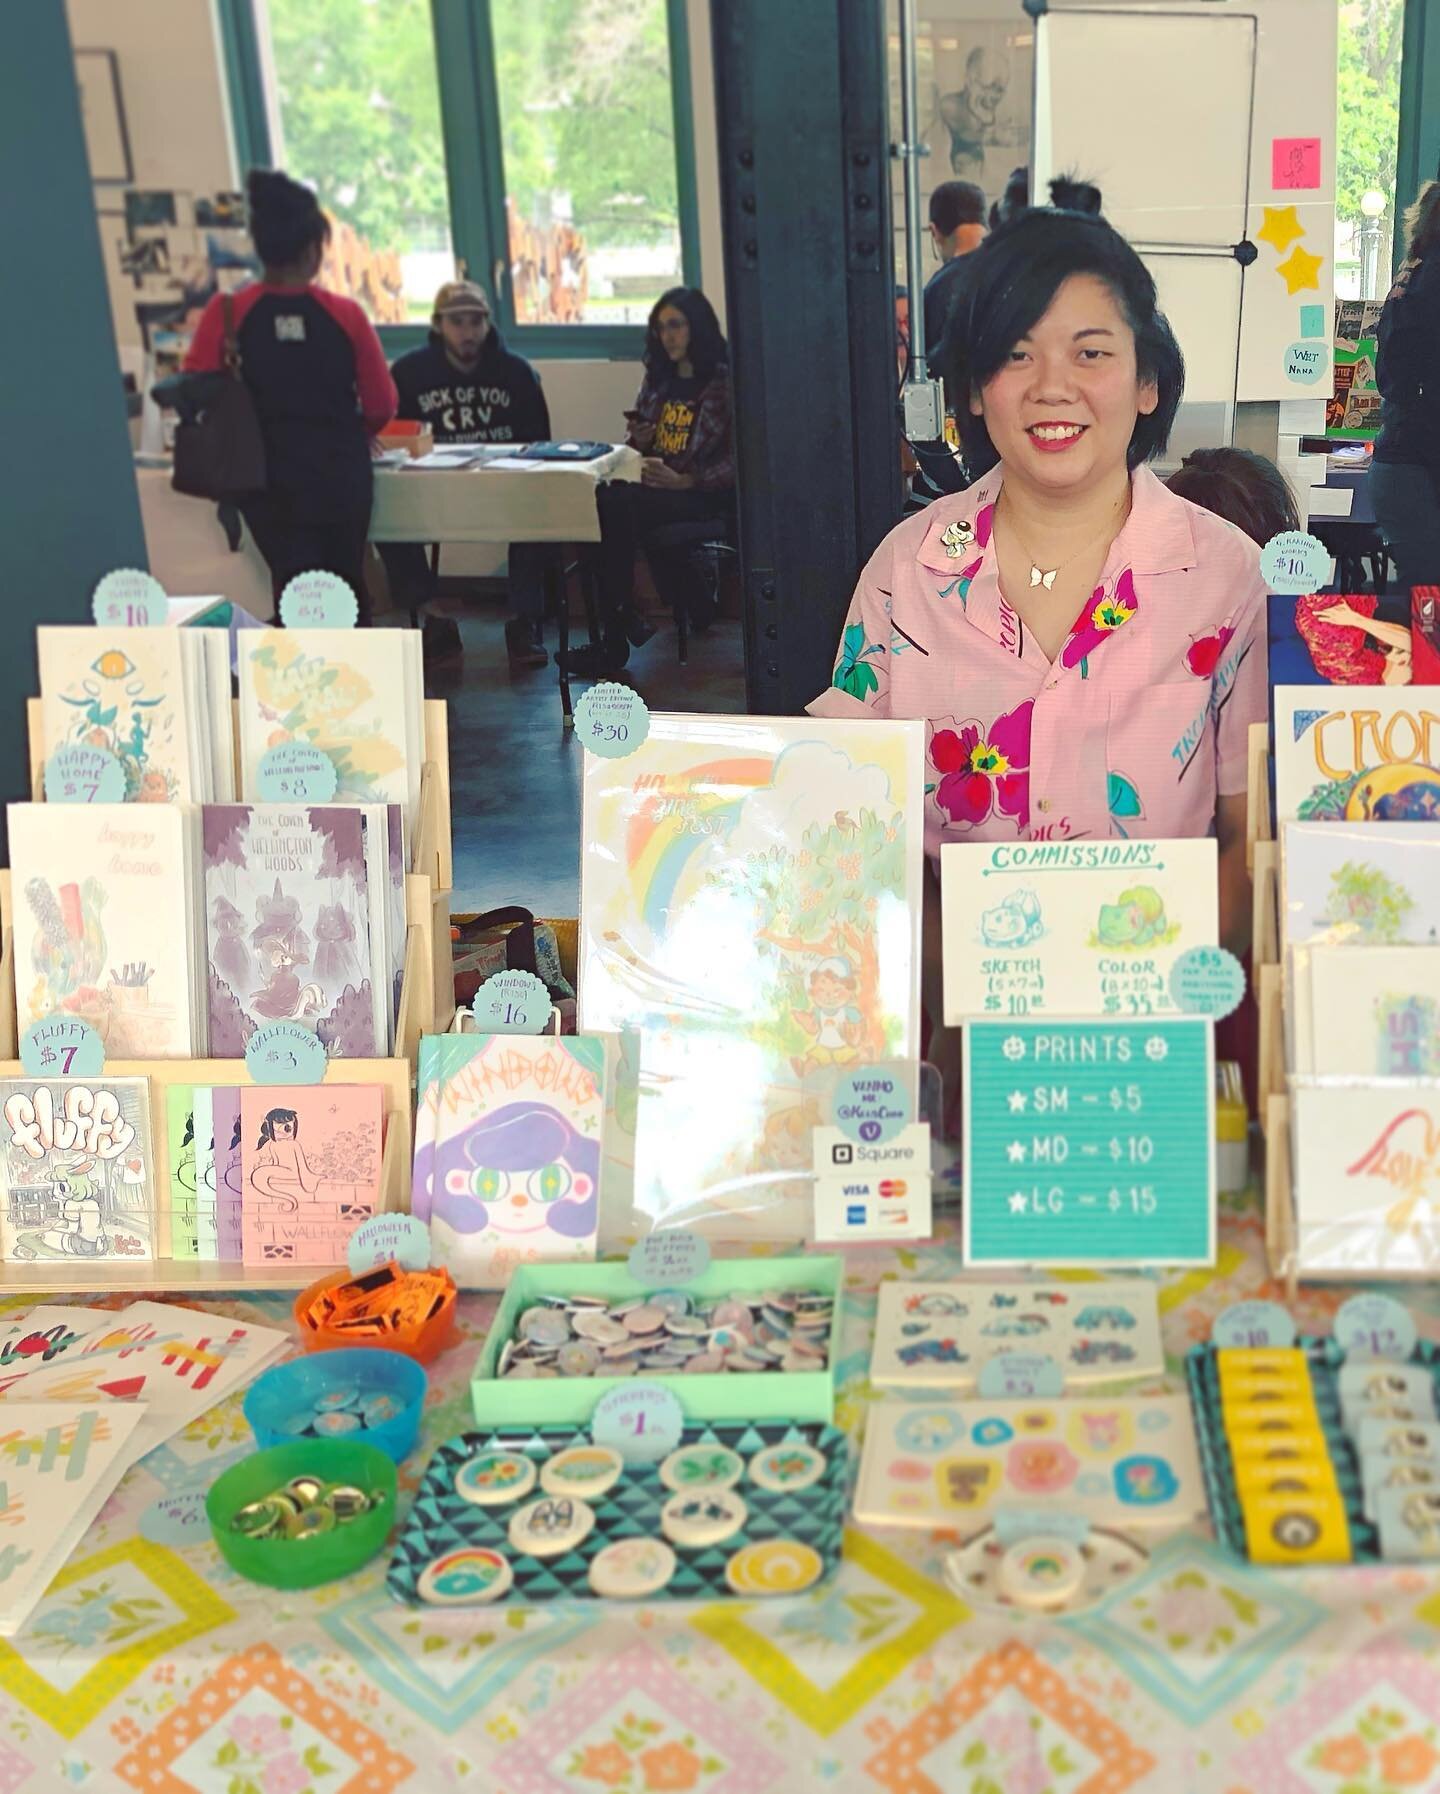 Well, I had wanted to make a bunch of copies of everything and set up a little zine table in my house for @pikespeakzinefest this weekend, but with all the planning things involved, that didn&rsquo;t happen 😅. So here&rsquo;s my table at @denverzine